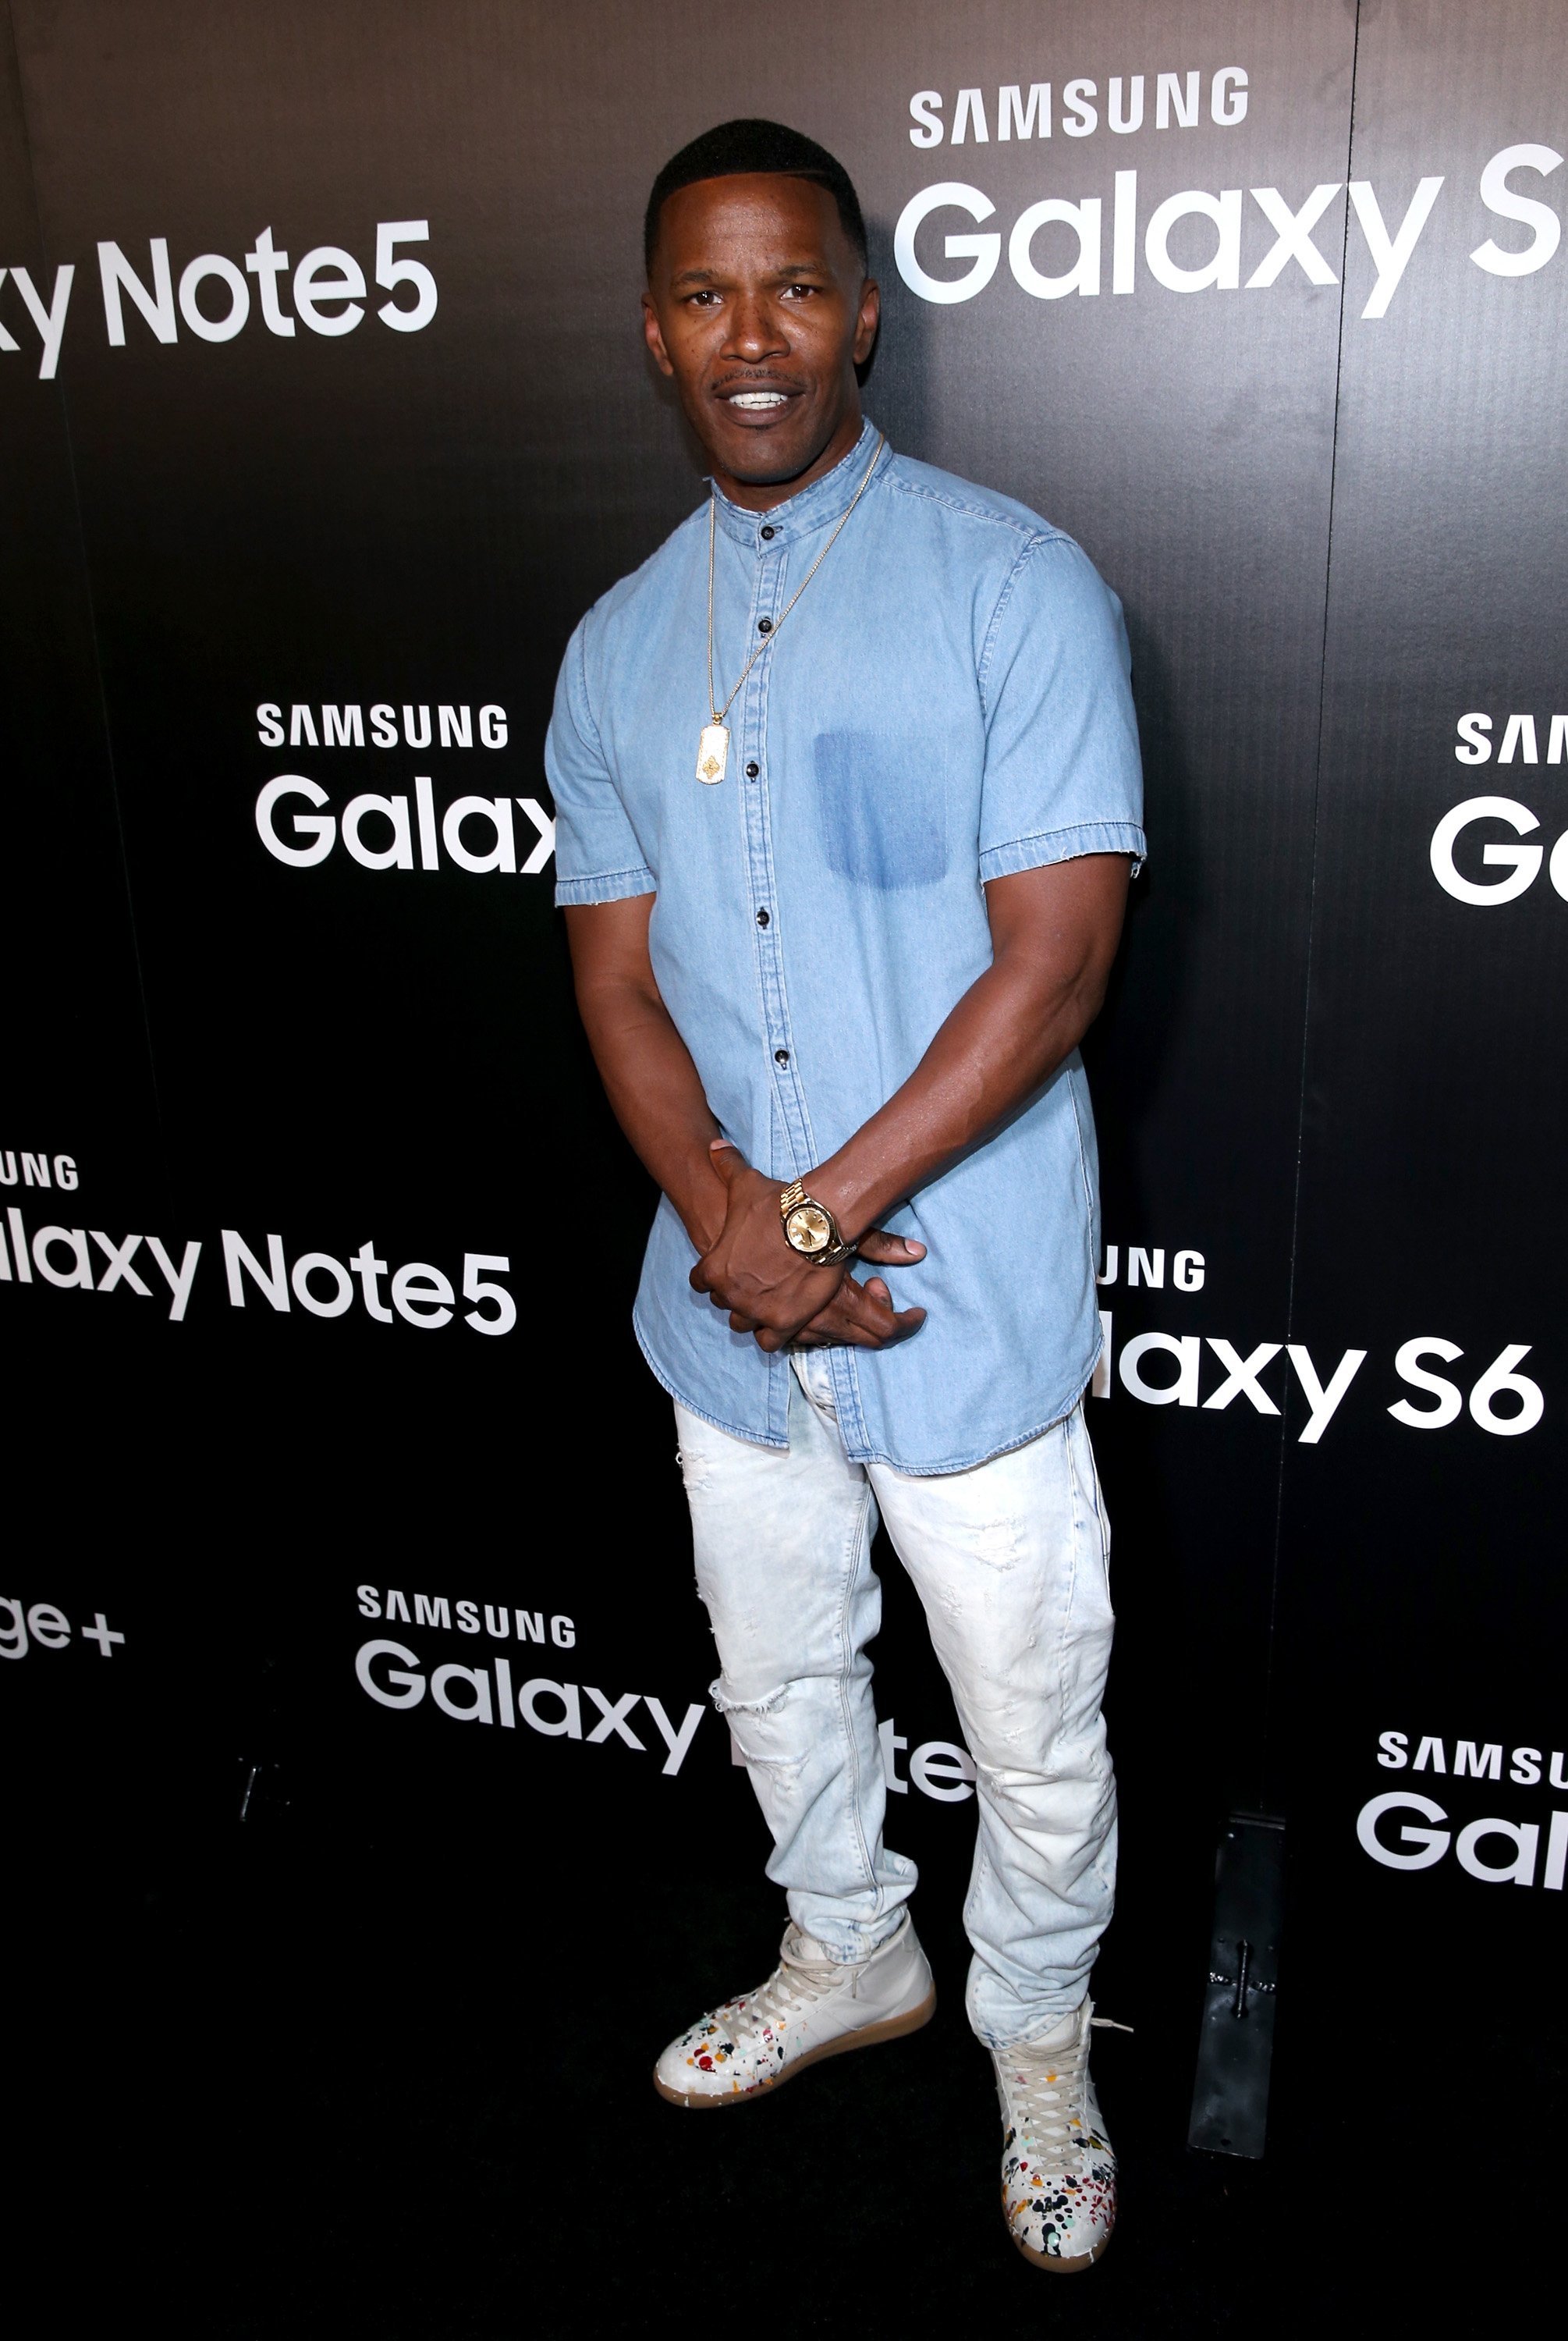 Jamie Foxx celebrates the new Samsung Galaxy S6 edge+ and Galaxy Note5 at Launch Event on Aug. 18, 2015 in Los Angeles | Photo: Getty Images